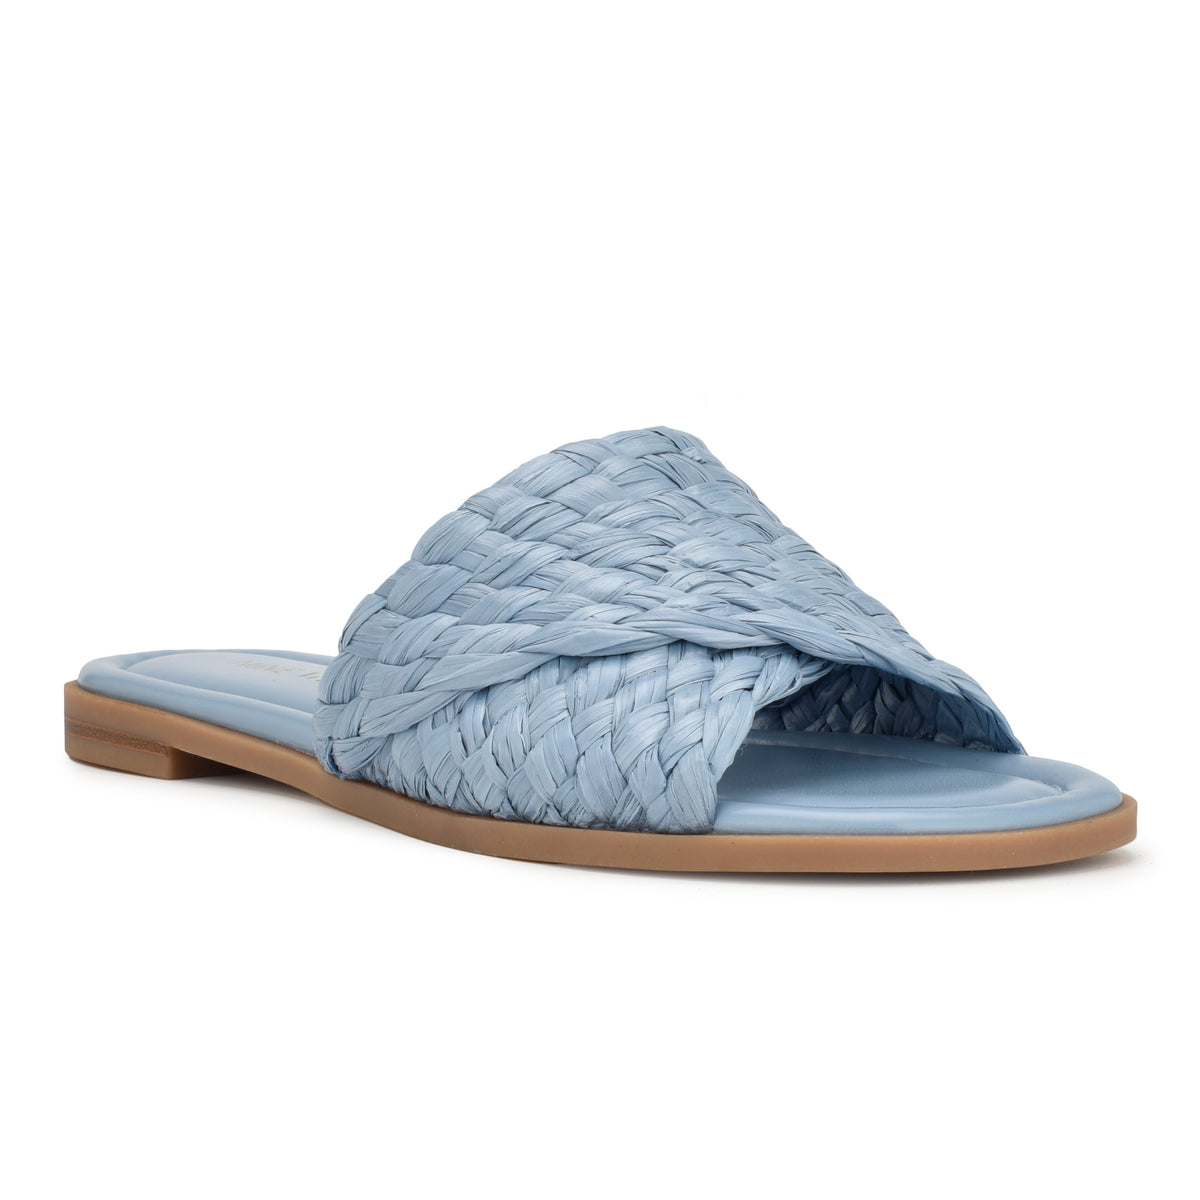 K. Jacques Outlet: flat sandals for woman - Gnawed Blue | K. Jacques flat  sandals EJ309223 online at GIGLIO.COM